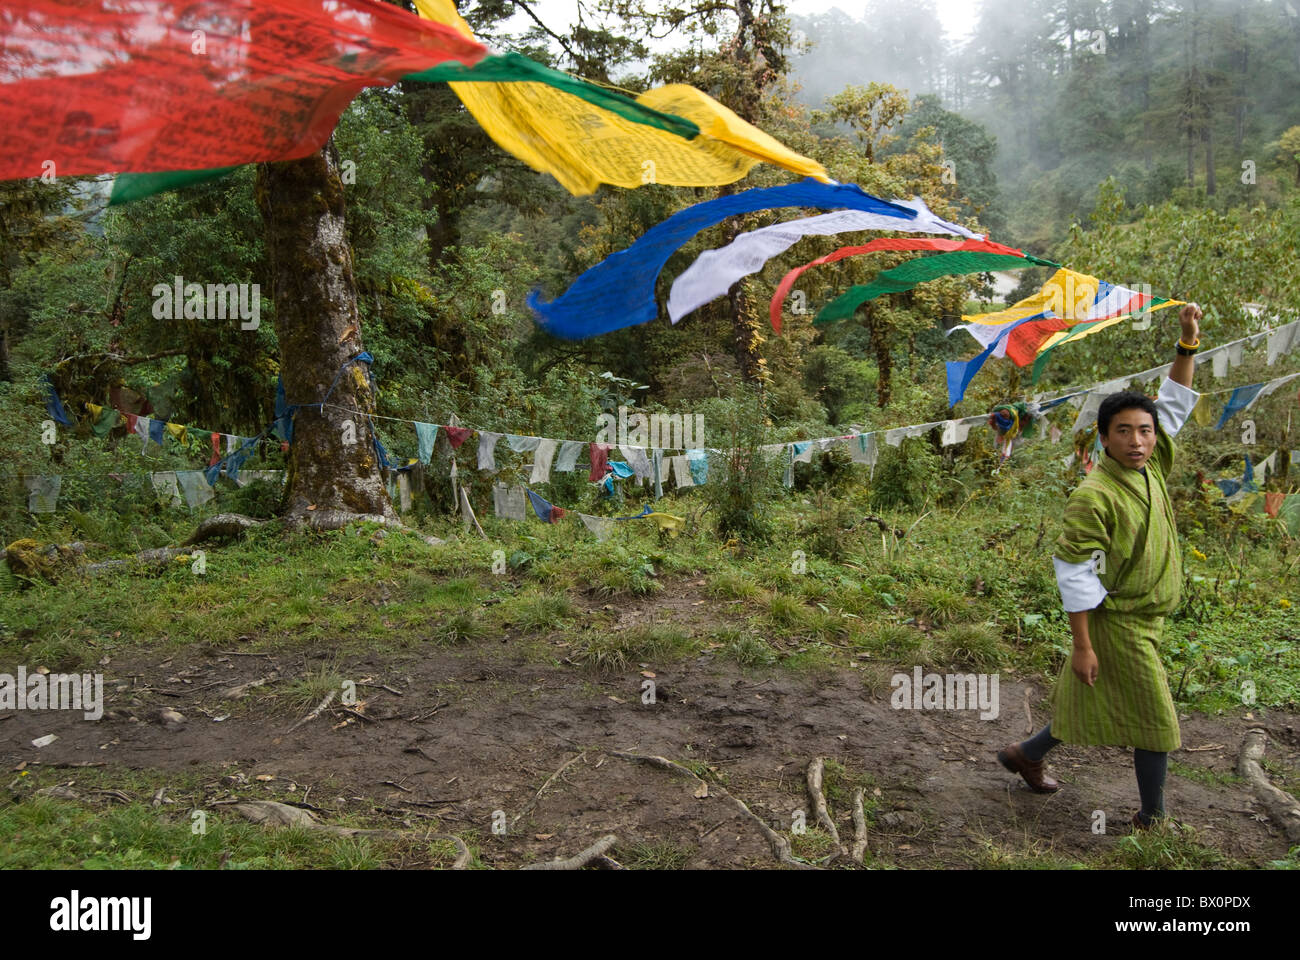 A Bhutanes man trying to find a place to hang/tie the prayer flags on the mountain of Dochula Pass, Bhutan. Stock Photo